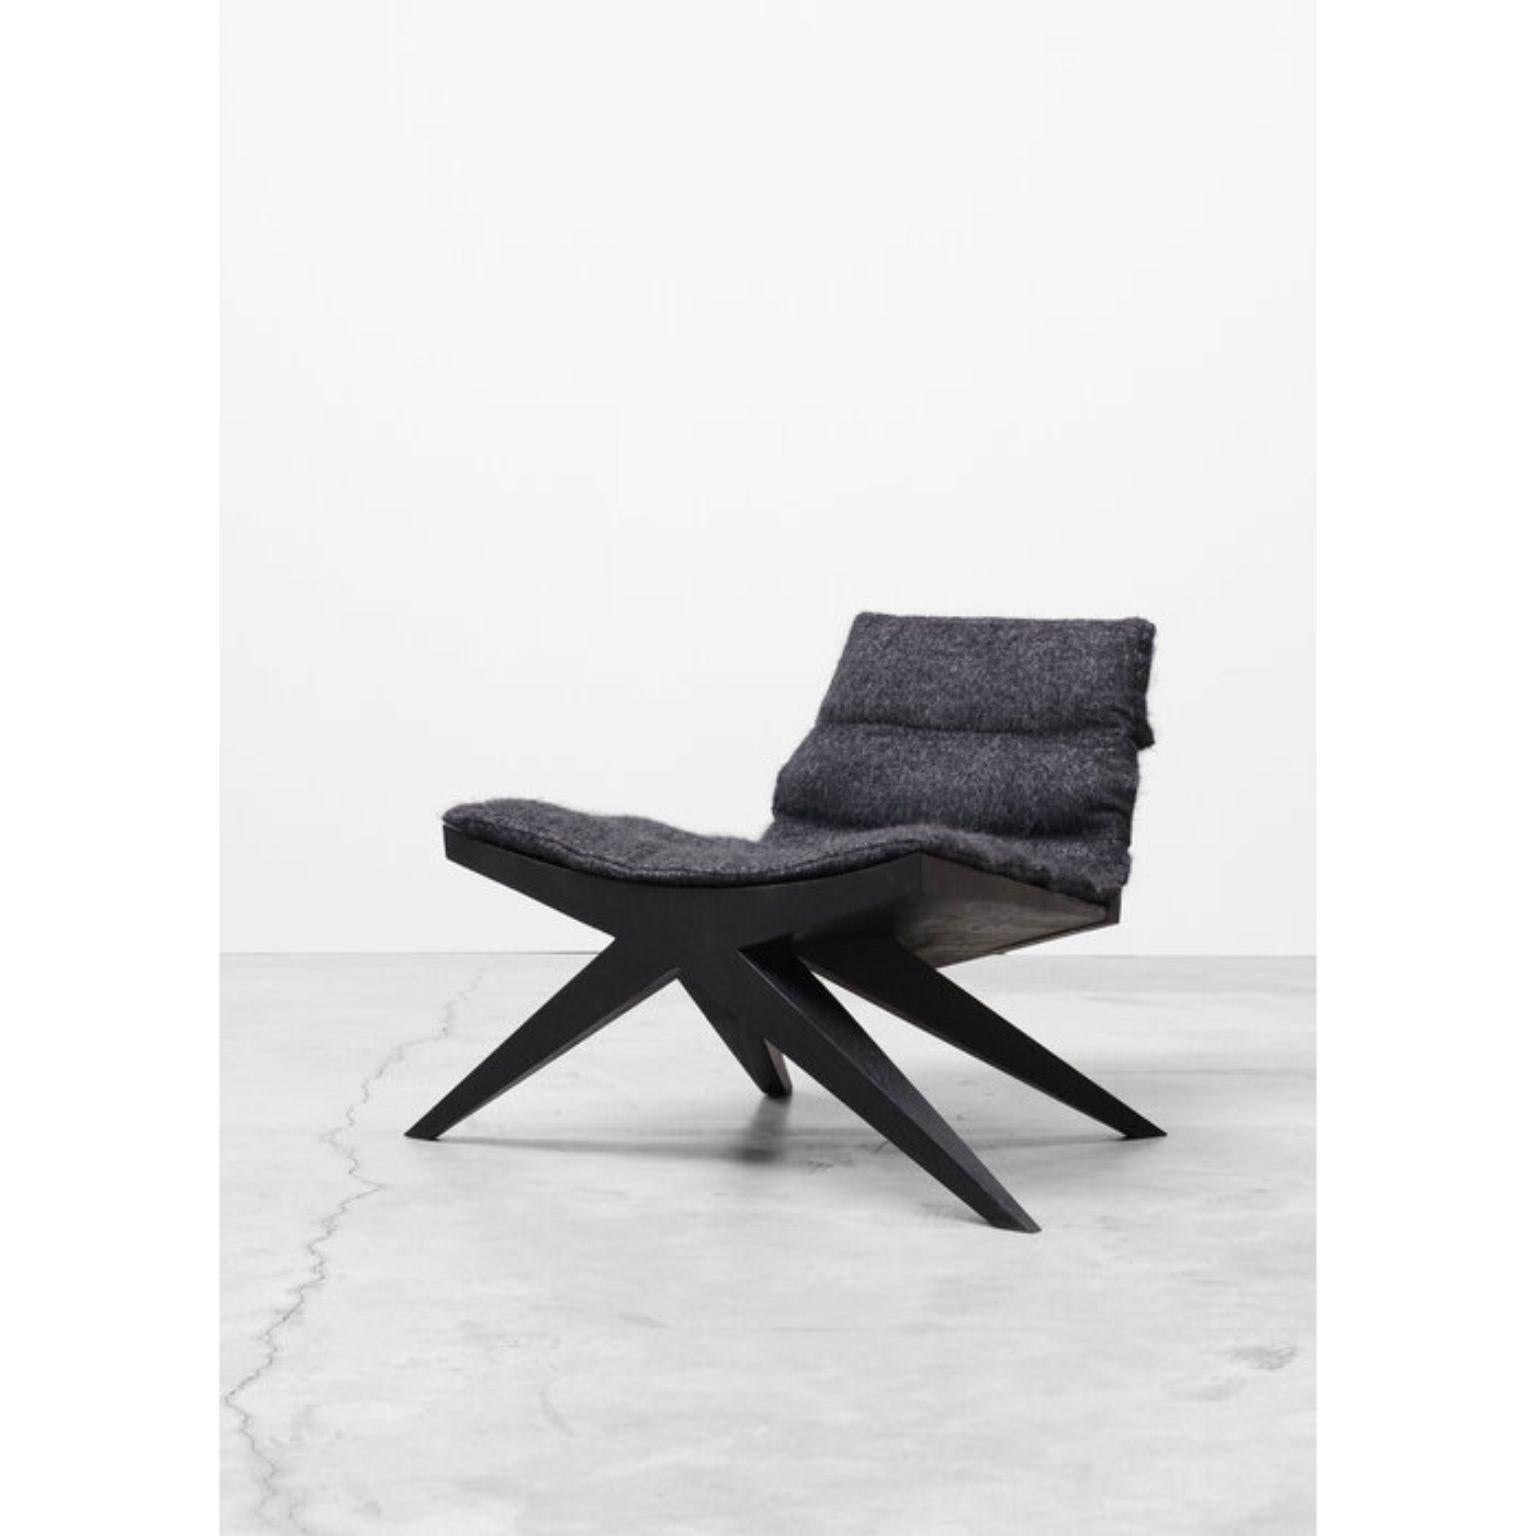 V-easy chair in iroko wood by Arno Declercq
Dimensions: W 100 x D 70 x H 70 cm 
Materials: Burned and waxed iroko wood

Cushion made in mohair by Pierre Frey more fabrics available and price on request. 

Arno Declercq
Belgian designer and art